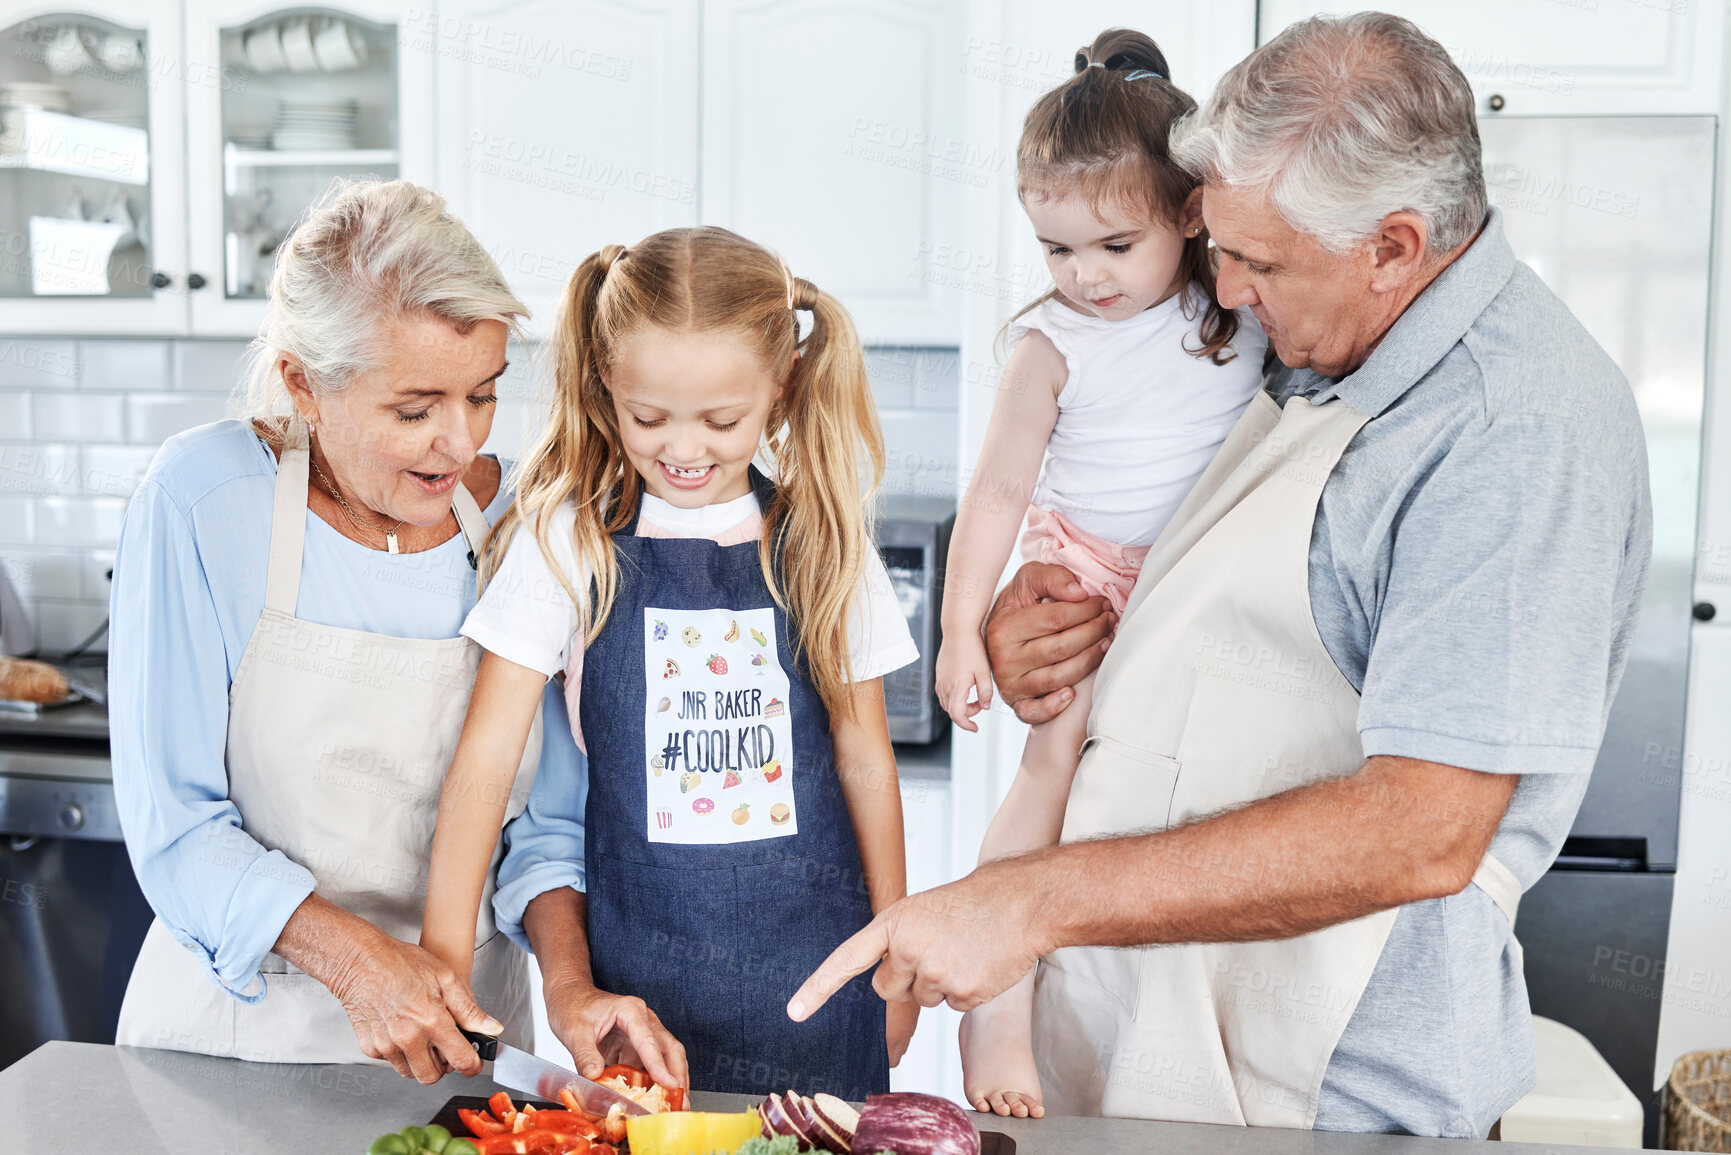 Buy stock photo Cooking, smile and grandparents teaching children to cook food together in the kitchen of their house. Happy and young kids learning and helping an elderly man and woman with healthy lunch or dinner